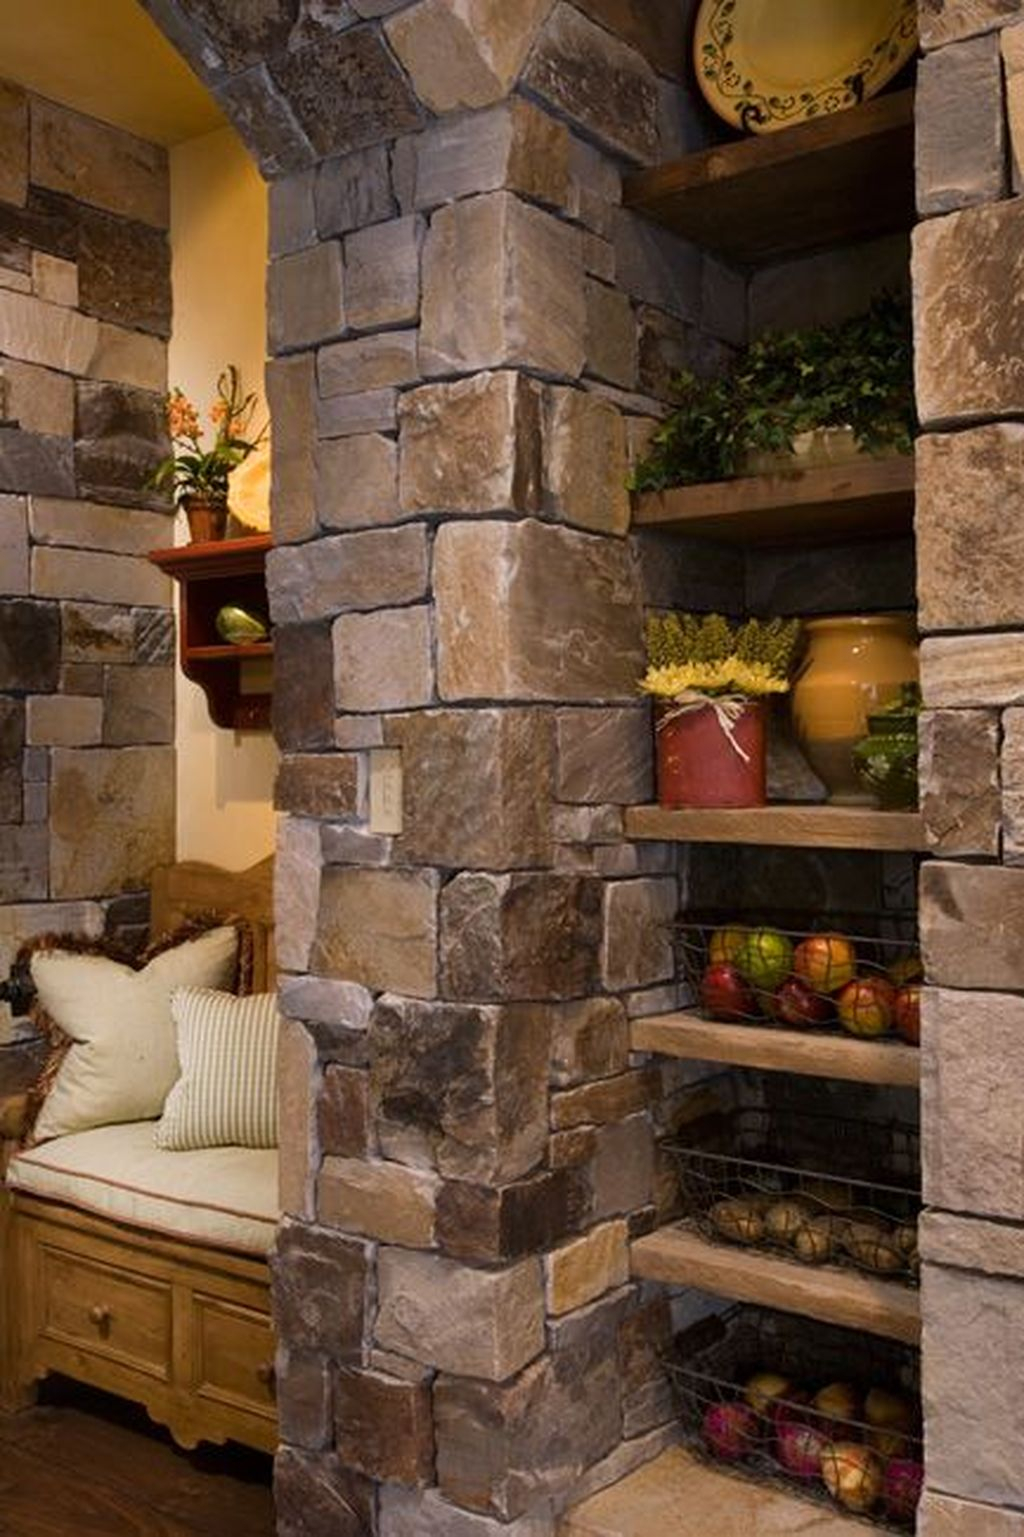 38 Inspire Ideas To Make Bricks Blocks Look Awesome In Your Home